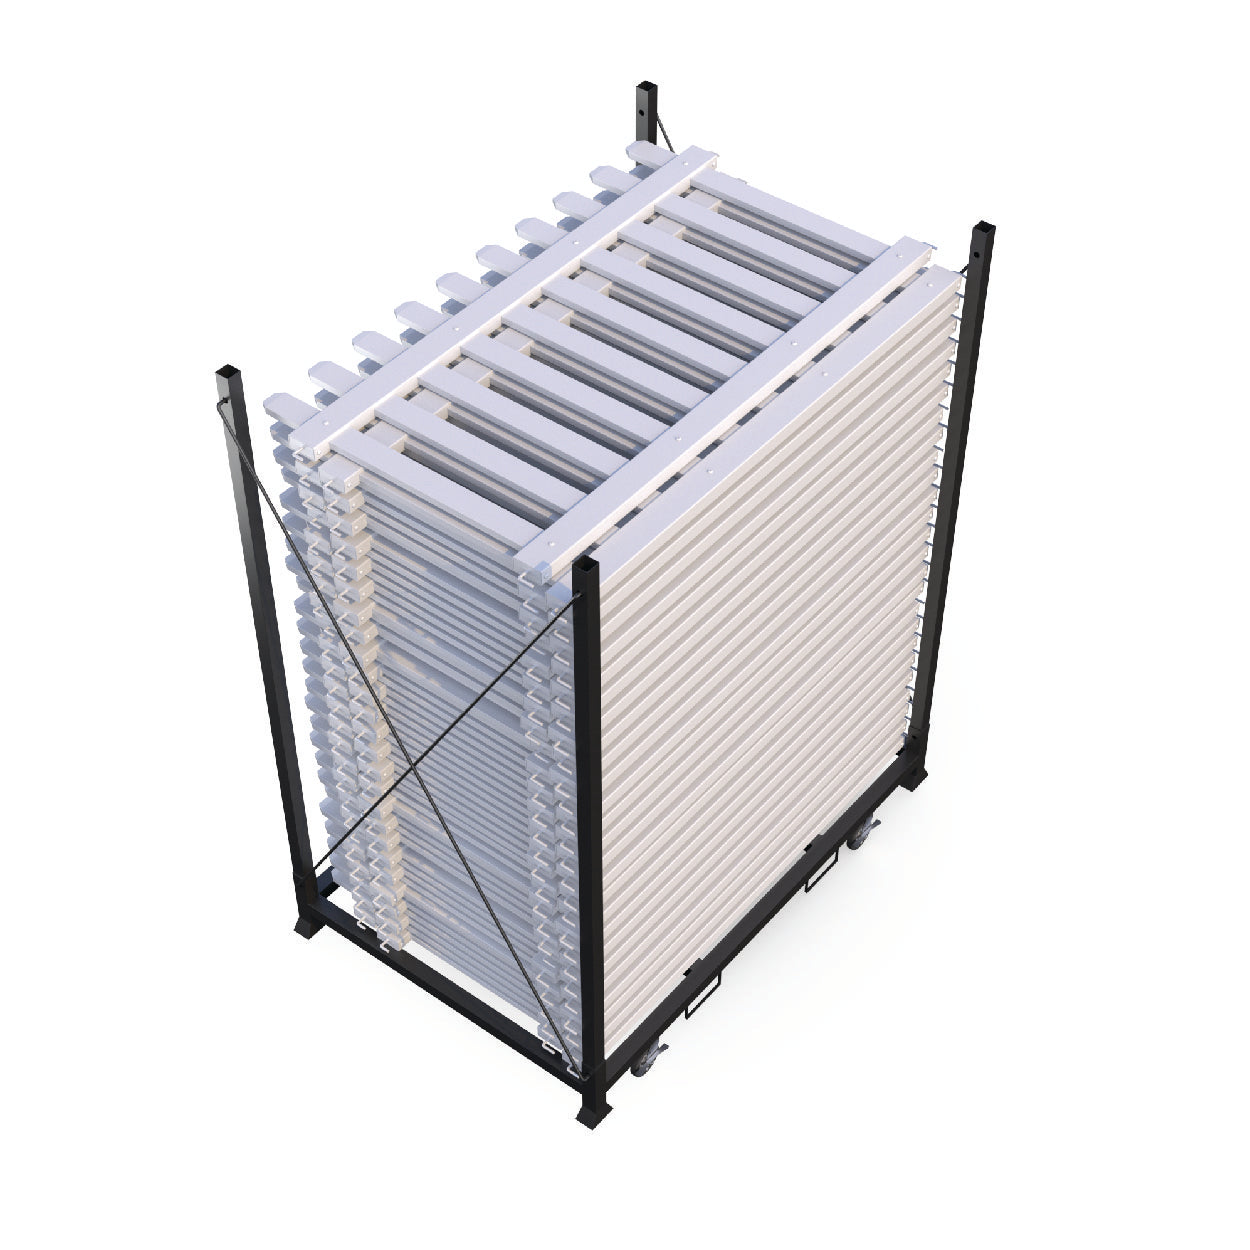 Mod-Fence Cart | Holds up to 50 panels